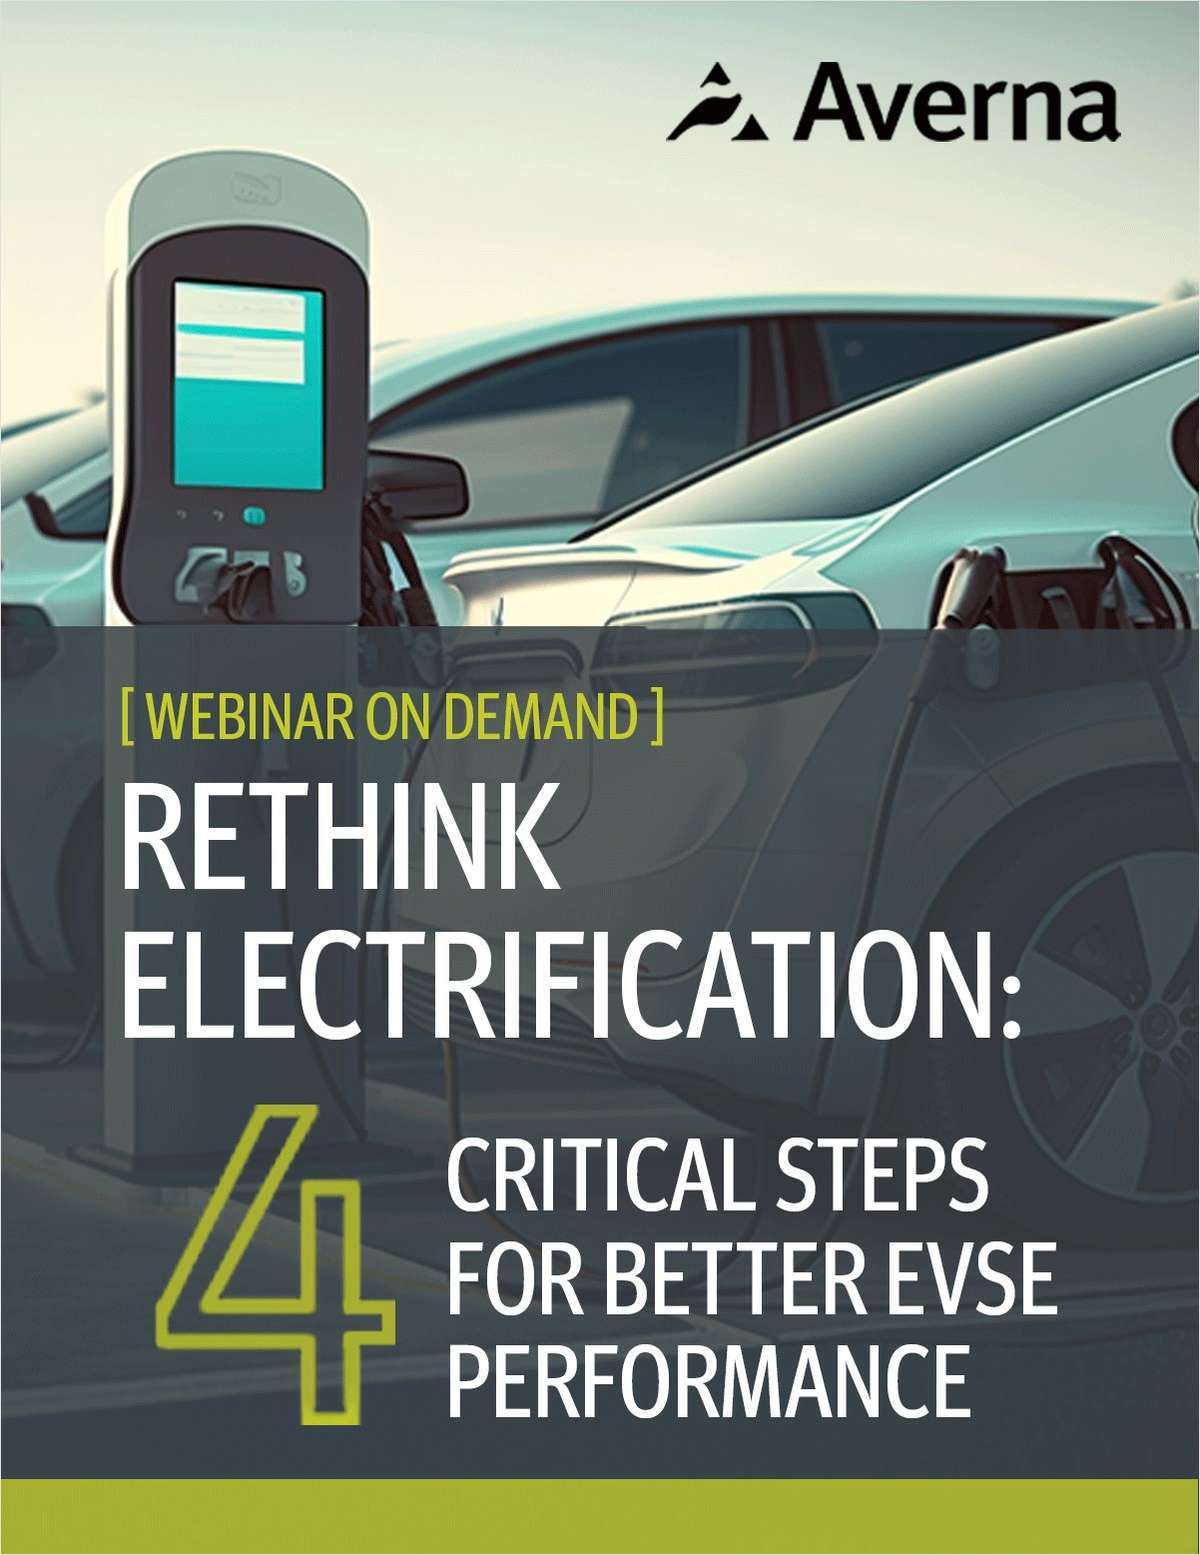 Rethink Electrification: 4 Critical Steps for Better EVSE Performance